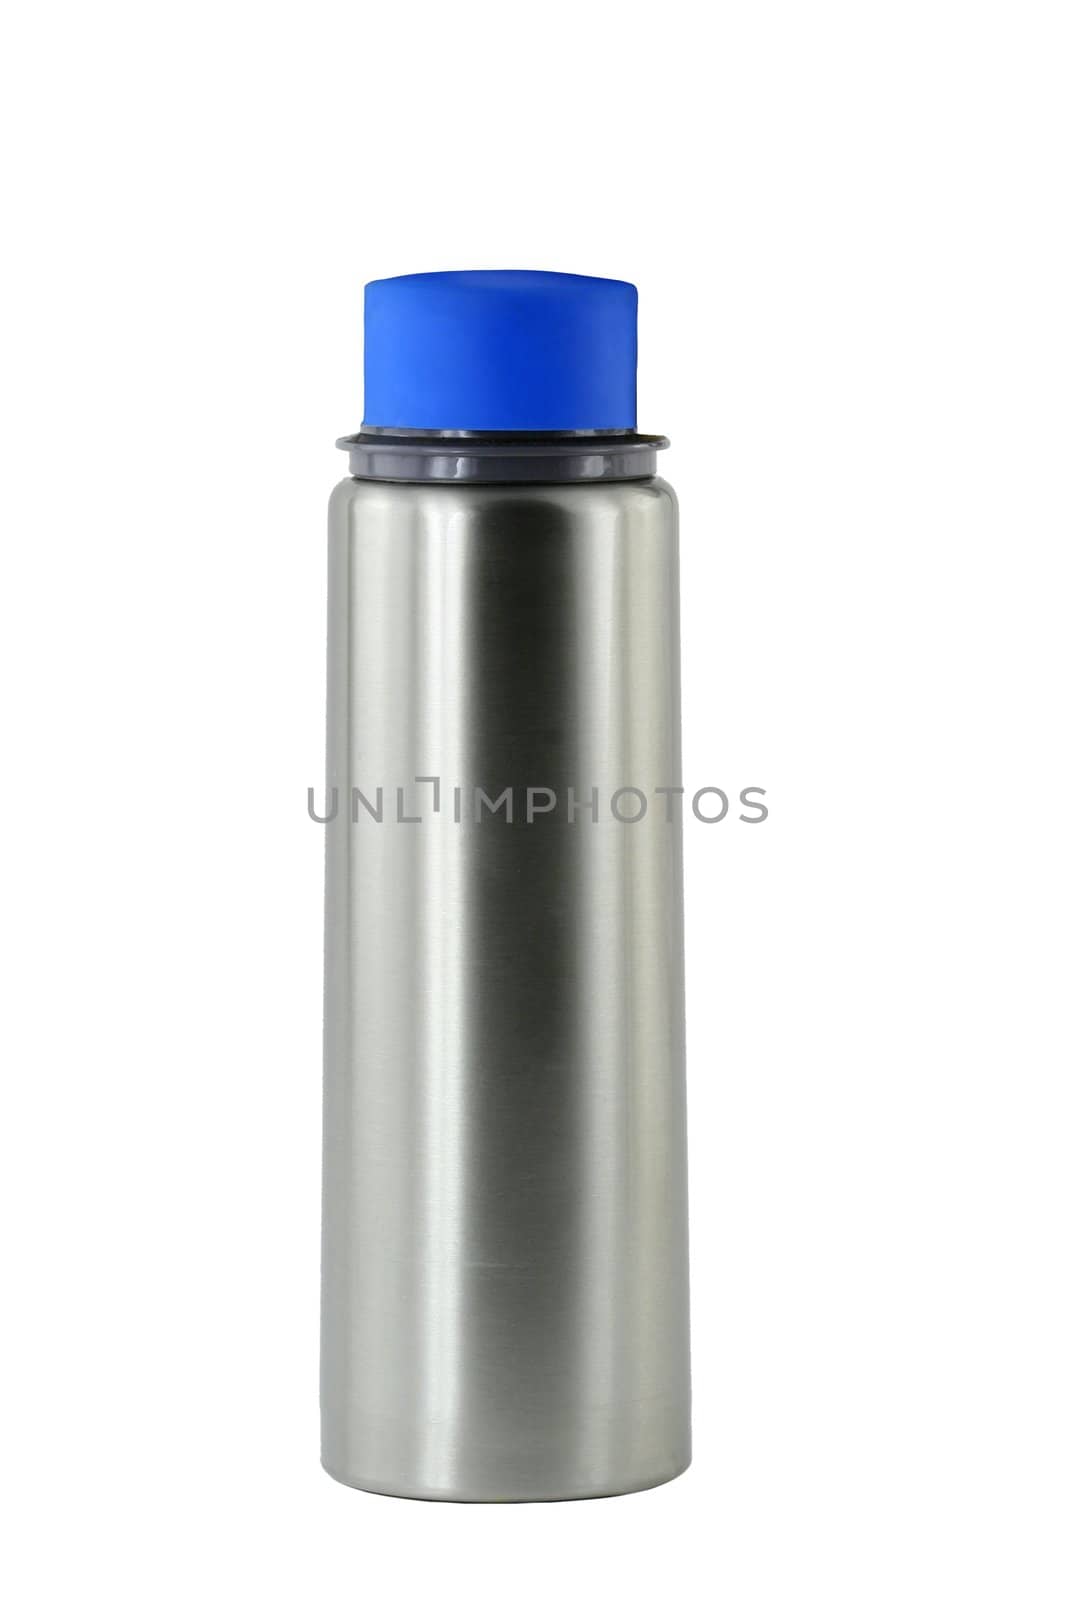 A Isolated aluminum water bottle